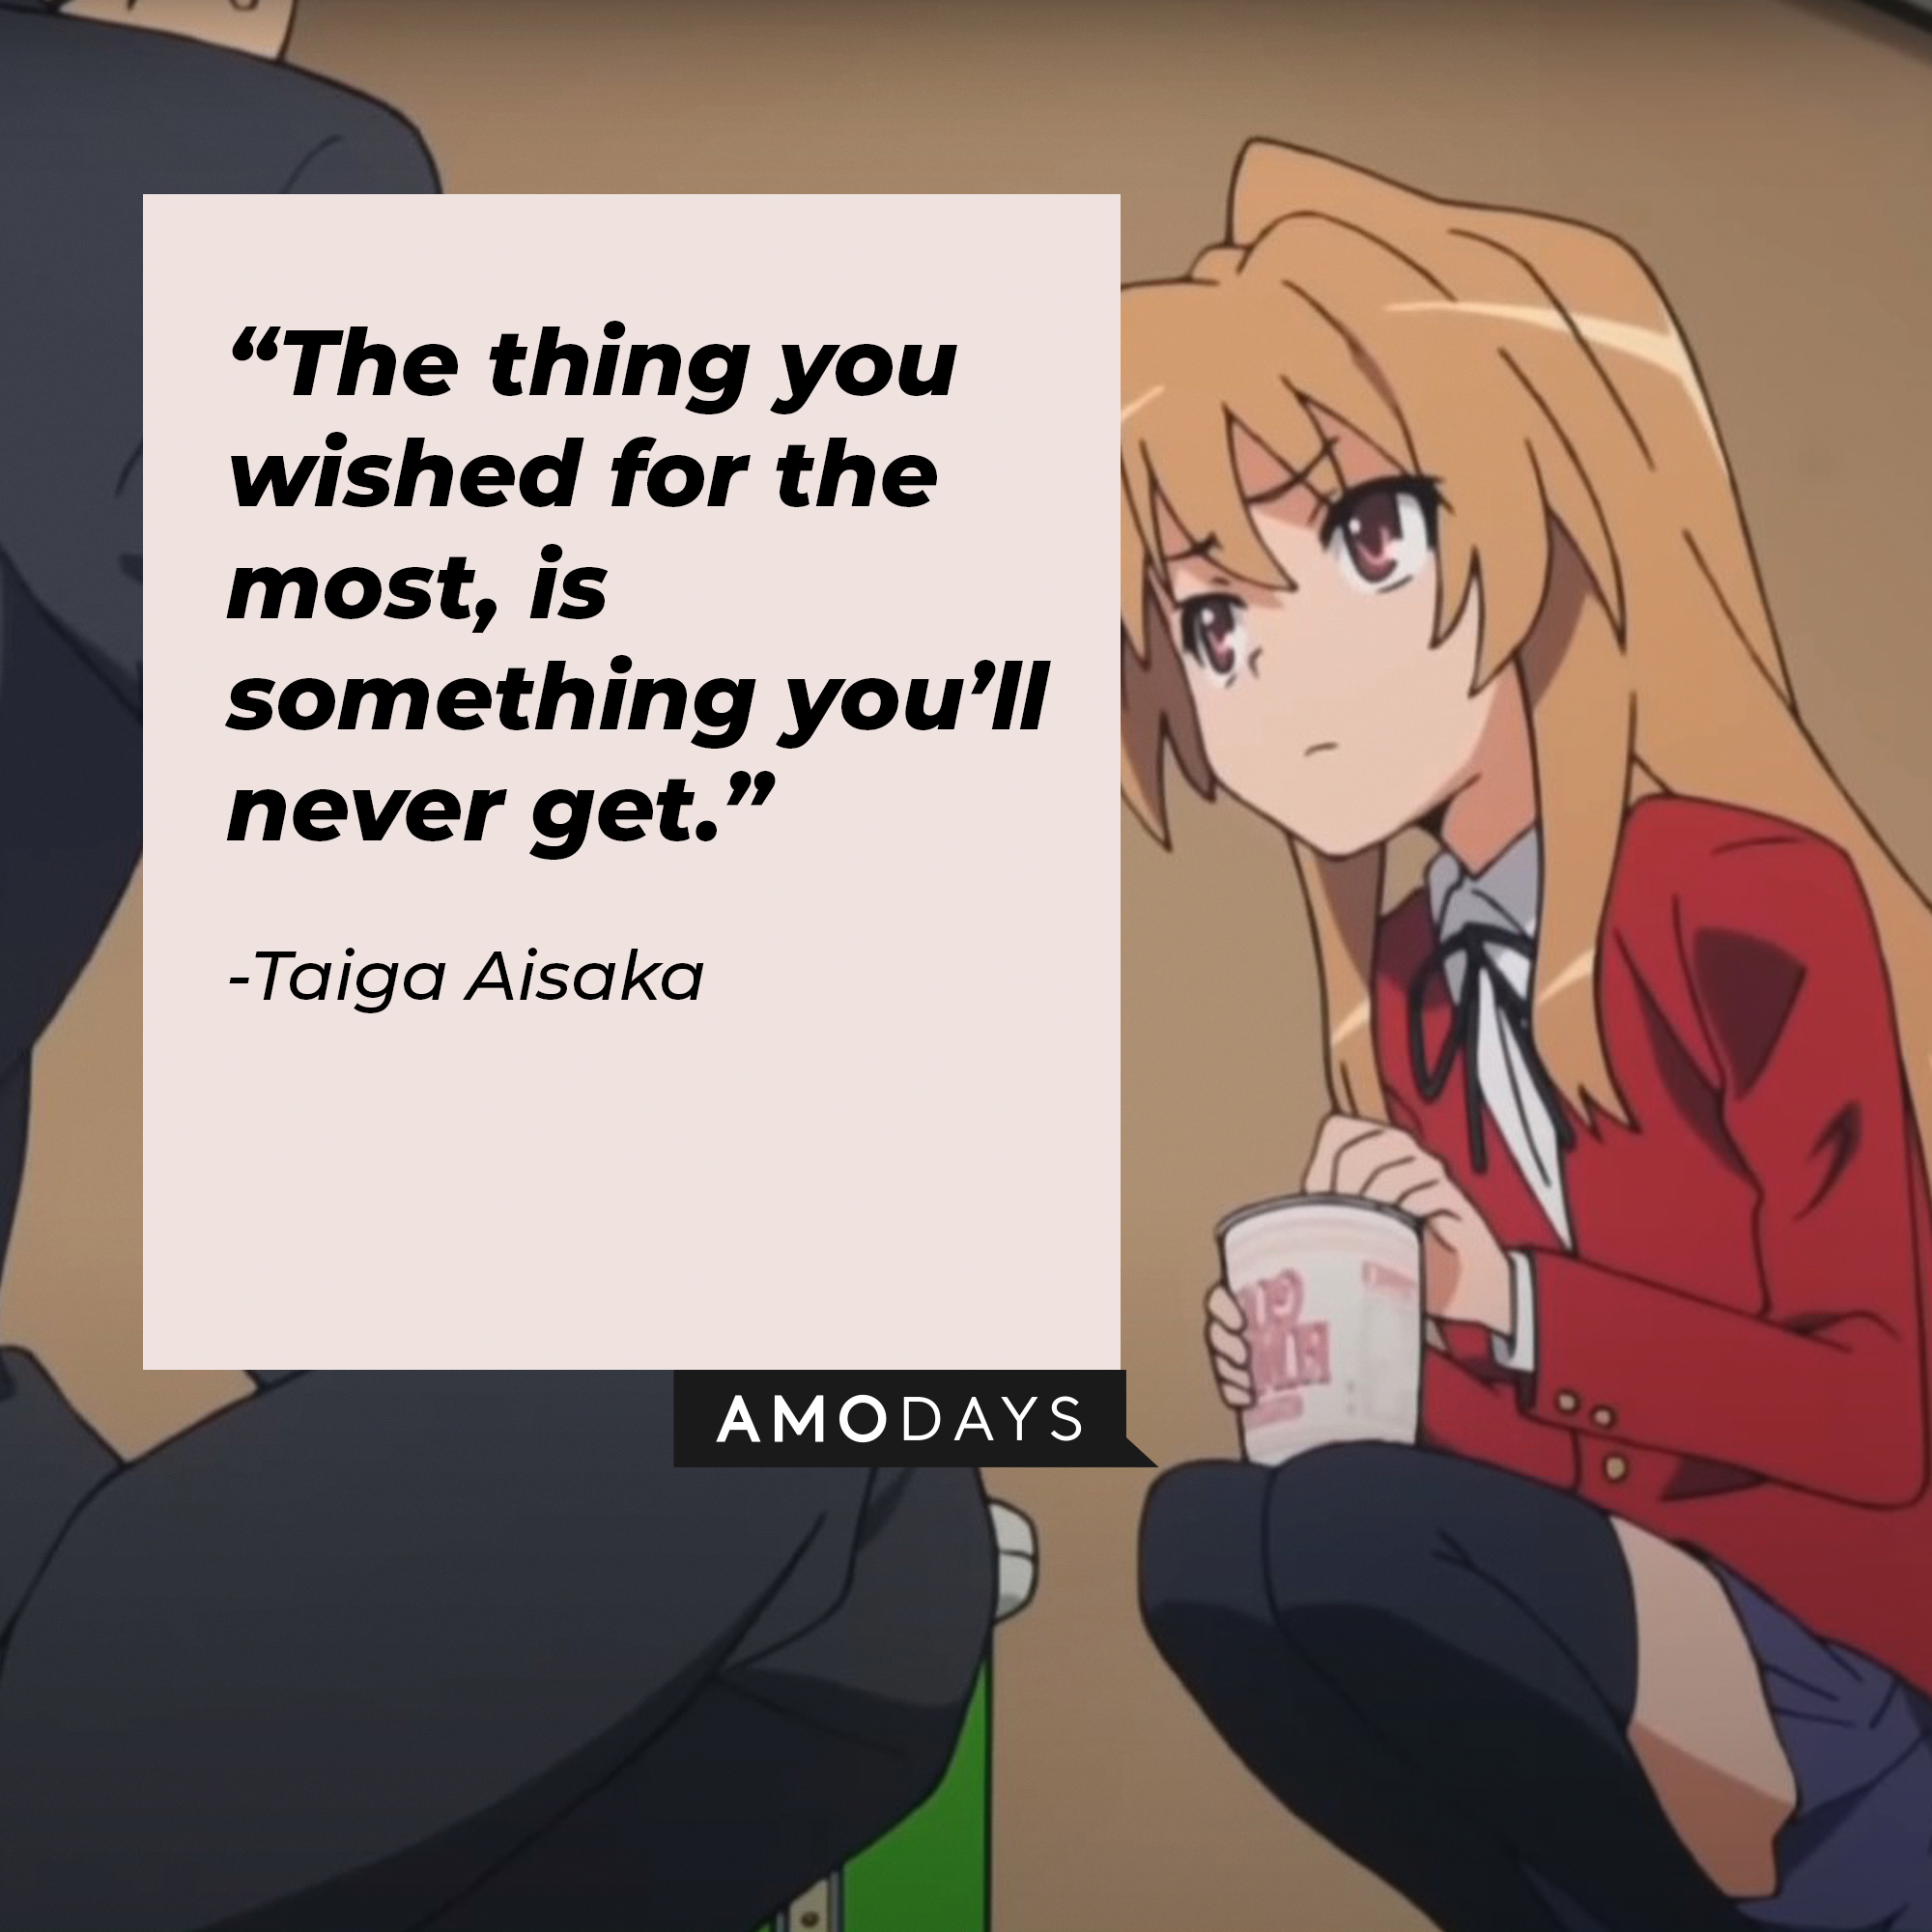 A picture of the animated character Taiga Aisaka with a quote by her: “The thing you wished for the most, is something you’ll never get.” | Image: facebook.com/toradoraoff